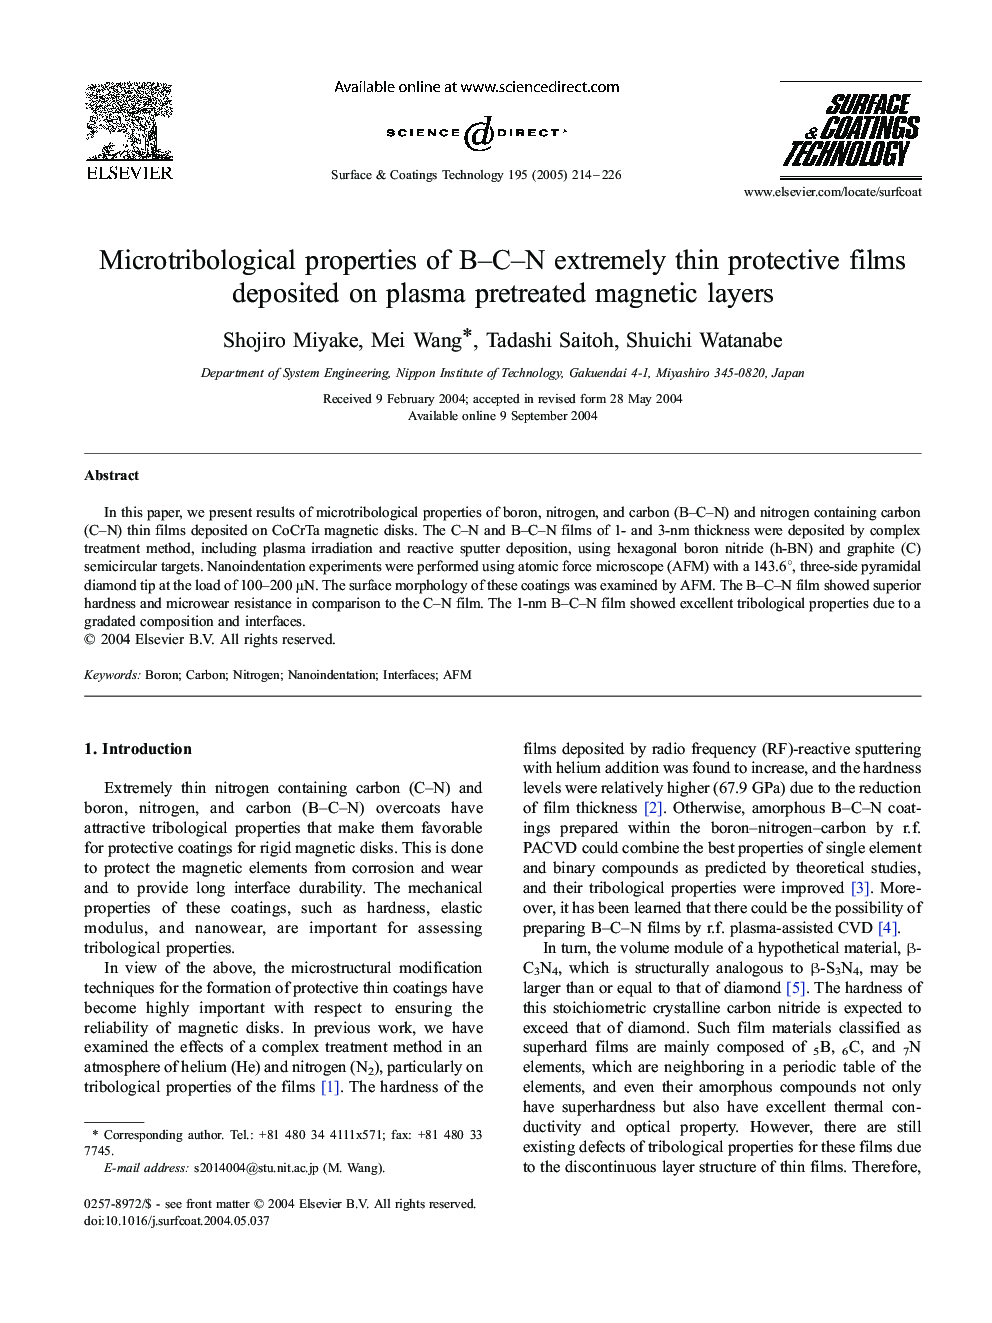 Microtribological properties of B-C-N extremely thin protective films deposited on plasma pretreated magnetic layers